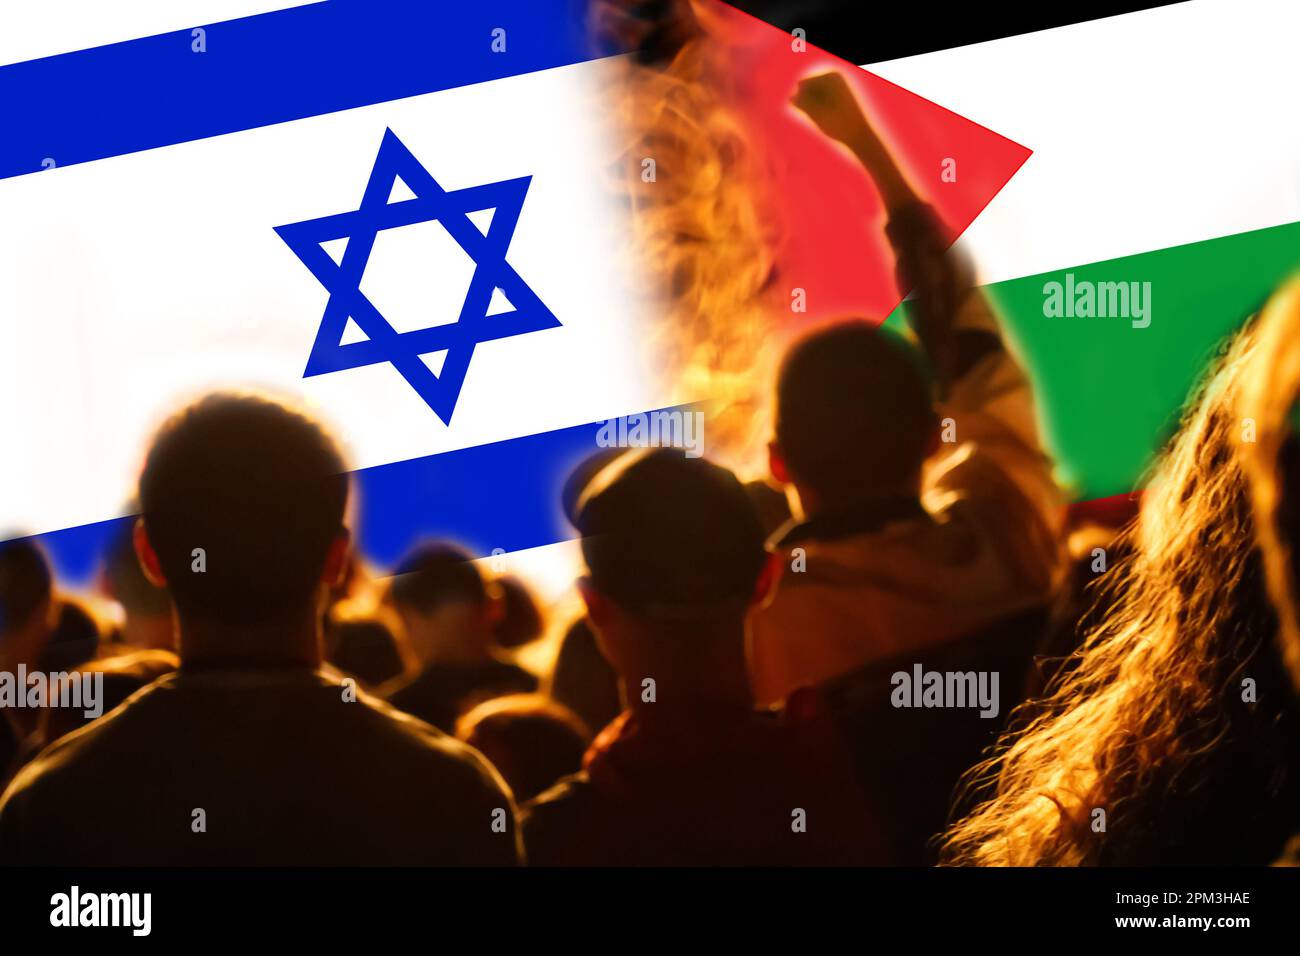 Israel Palestine war. Concept of crisis of war and political conflicts between nations. Flags. Fire, flames. Cracked stone background. Protests demons Stock Photo